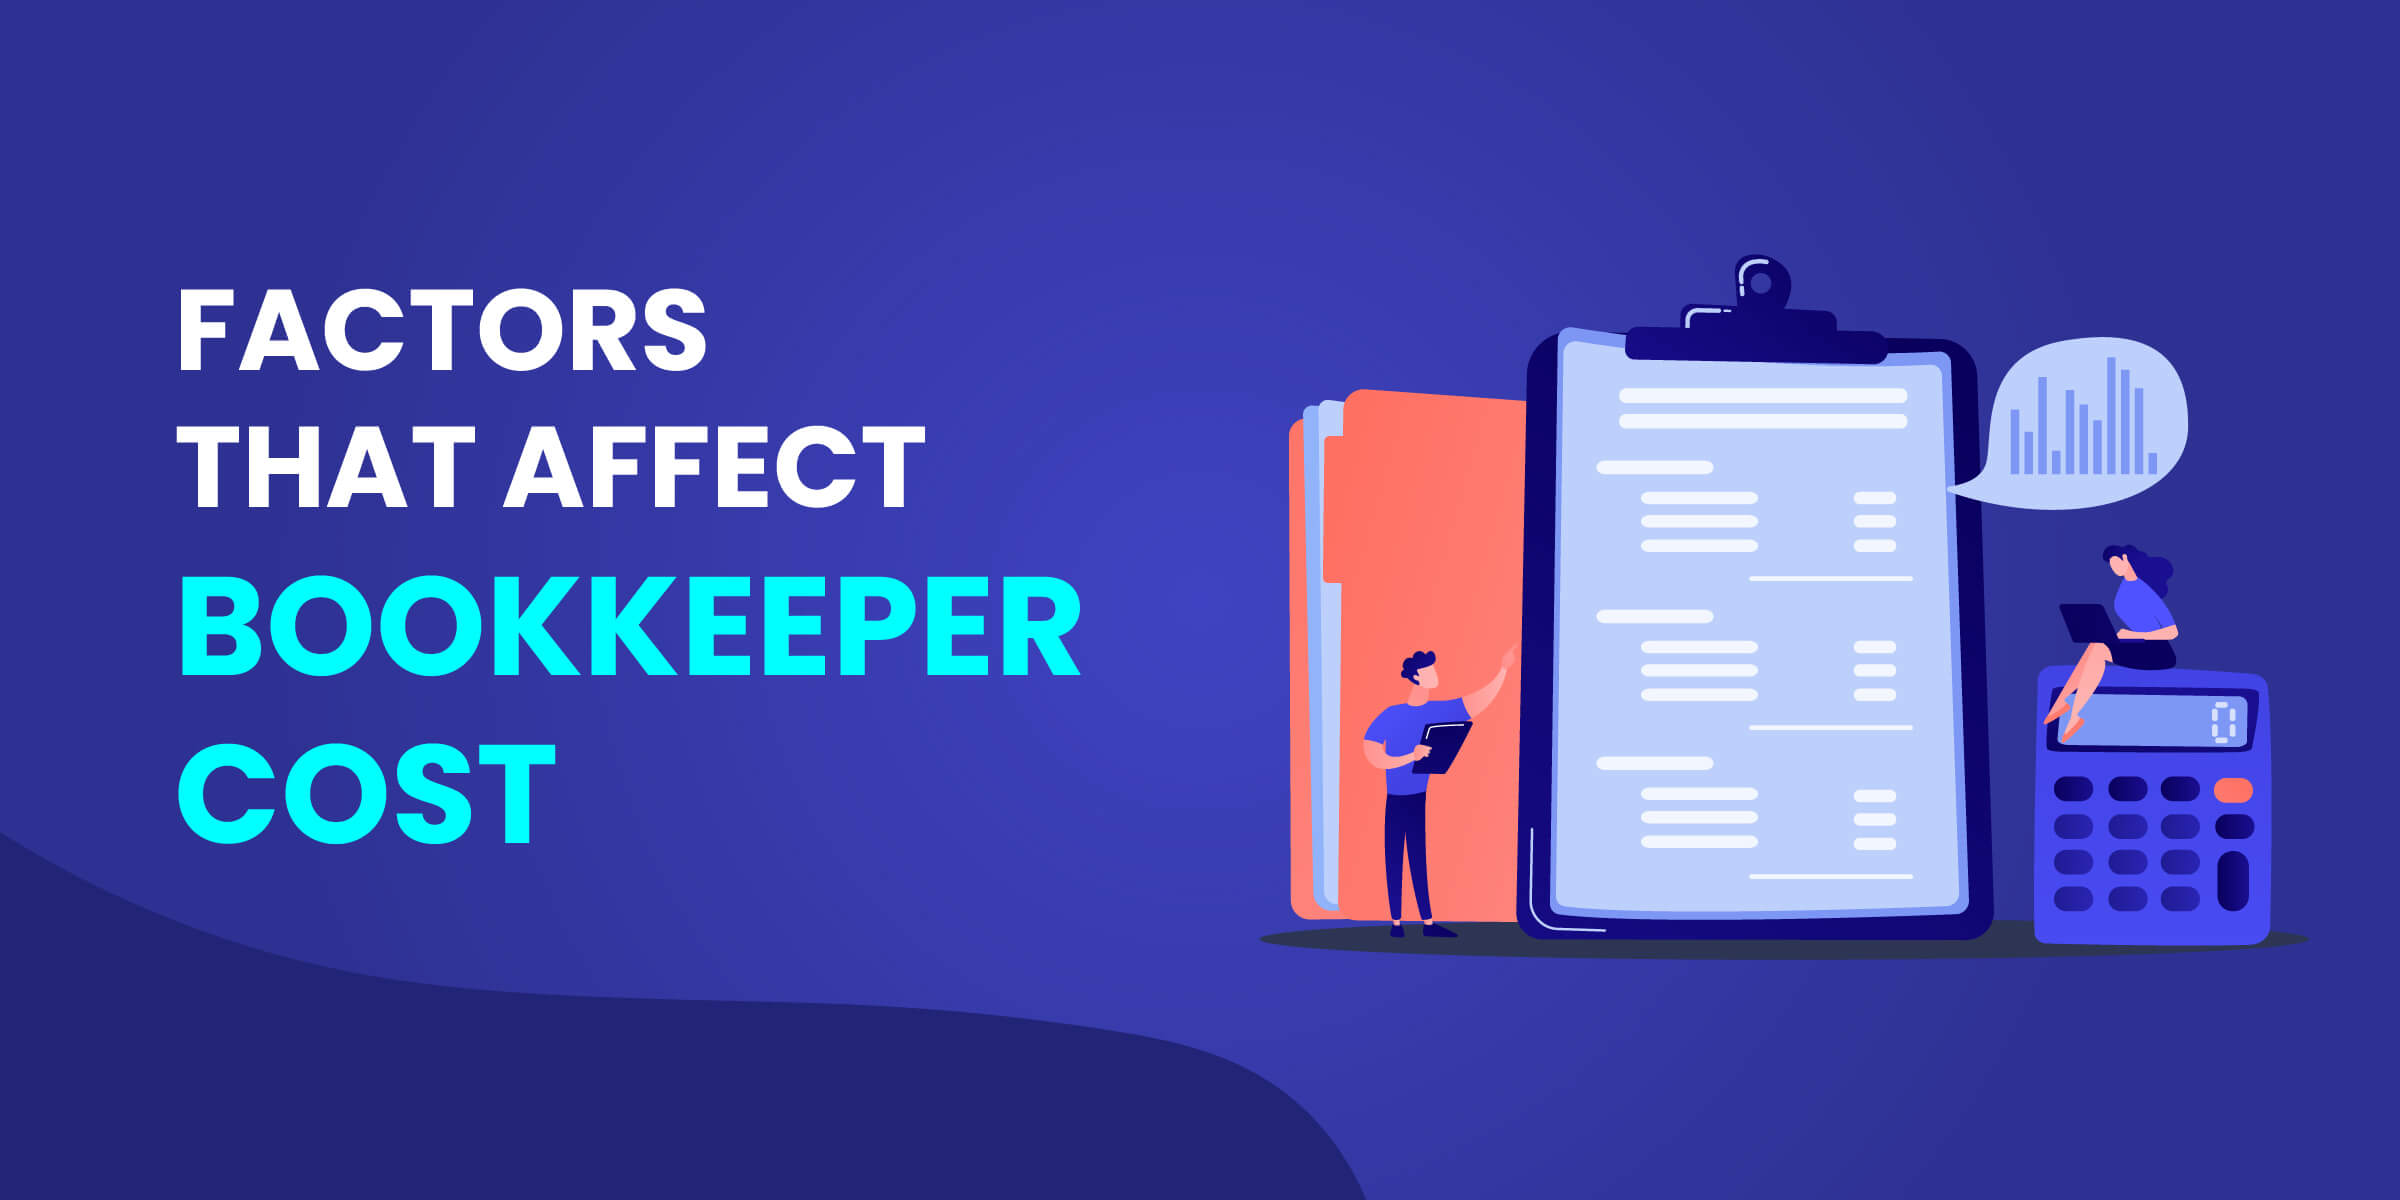 Factors That Affect Bookkeeper Cost